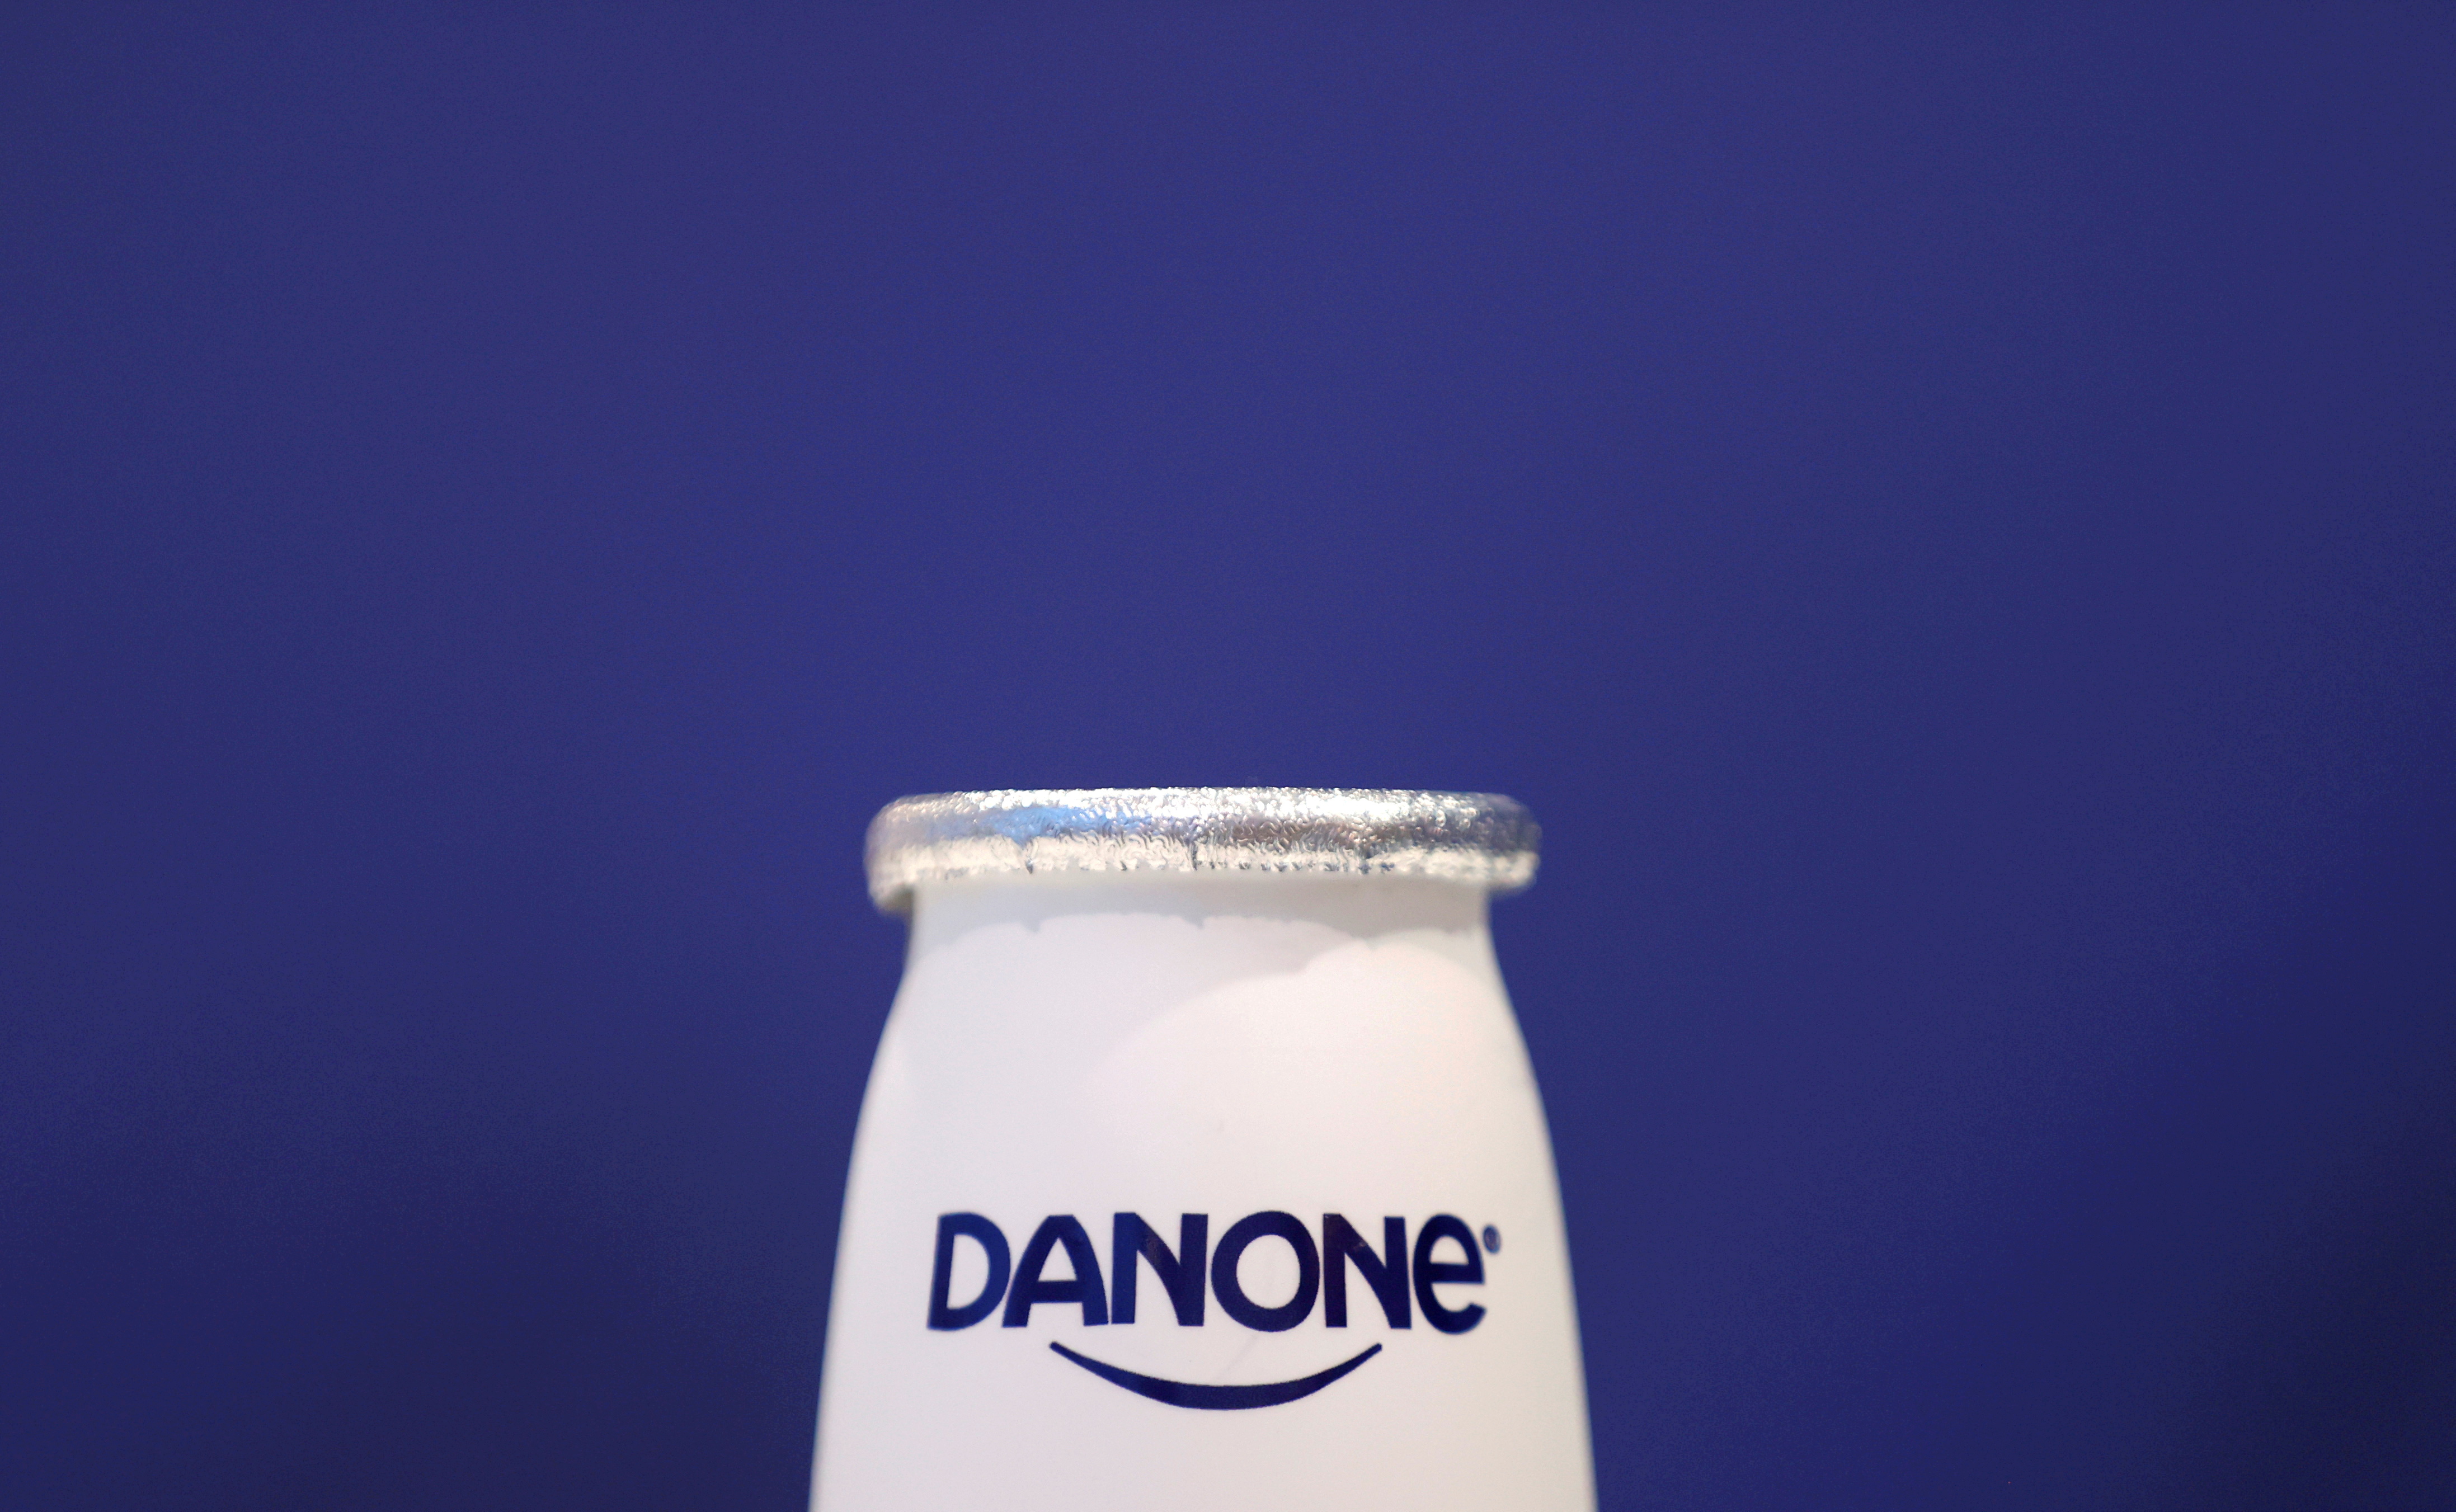 A company logo is seen on a product displayed before French food group Danone's 2019 annual results presentation in Paris, France, February 26, 2020. REUTERS/Christian Hartmann/File Photo